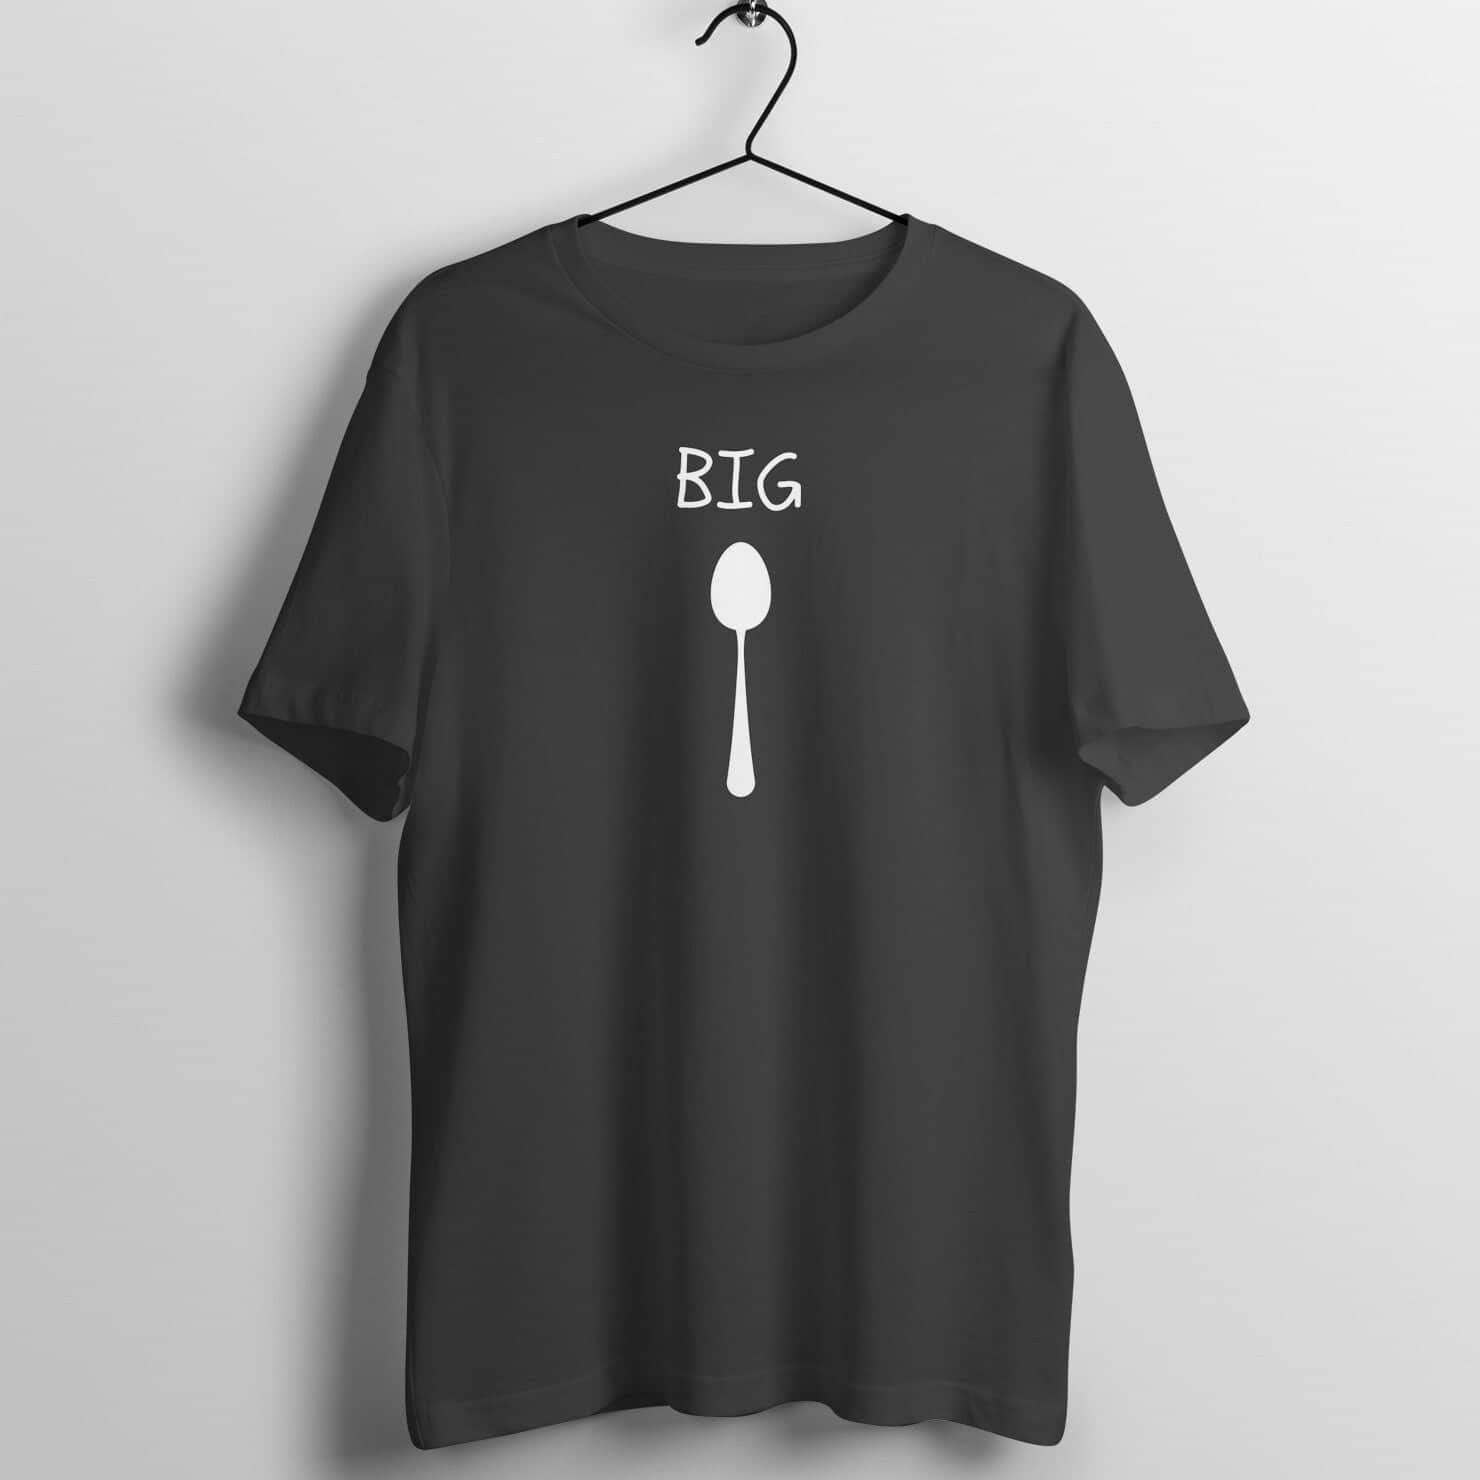 Big Spoon Special Black T Shirt for Men and Women freeshipping - Catch My Drift India